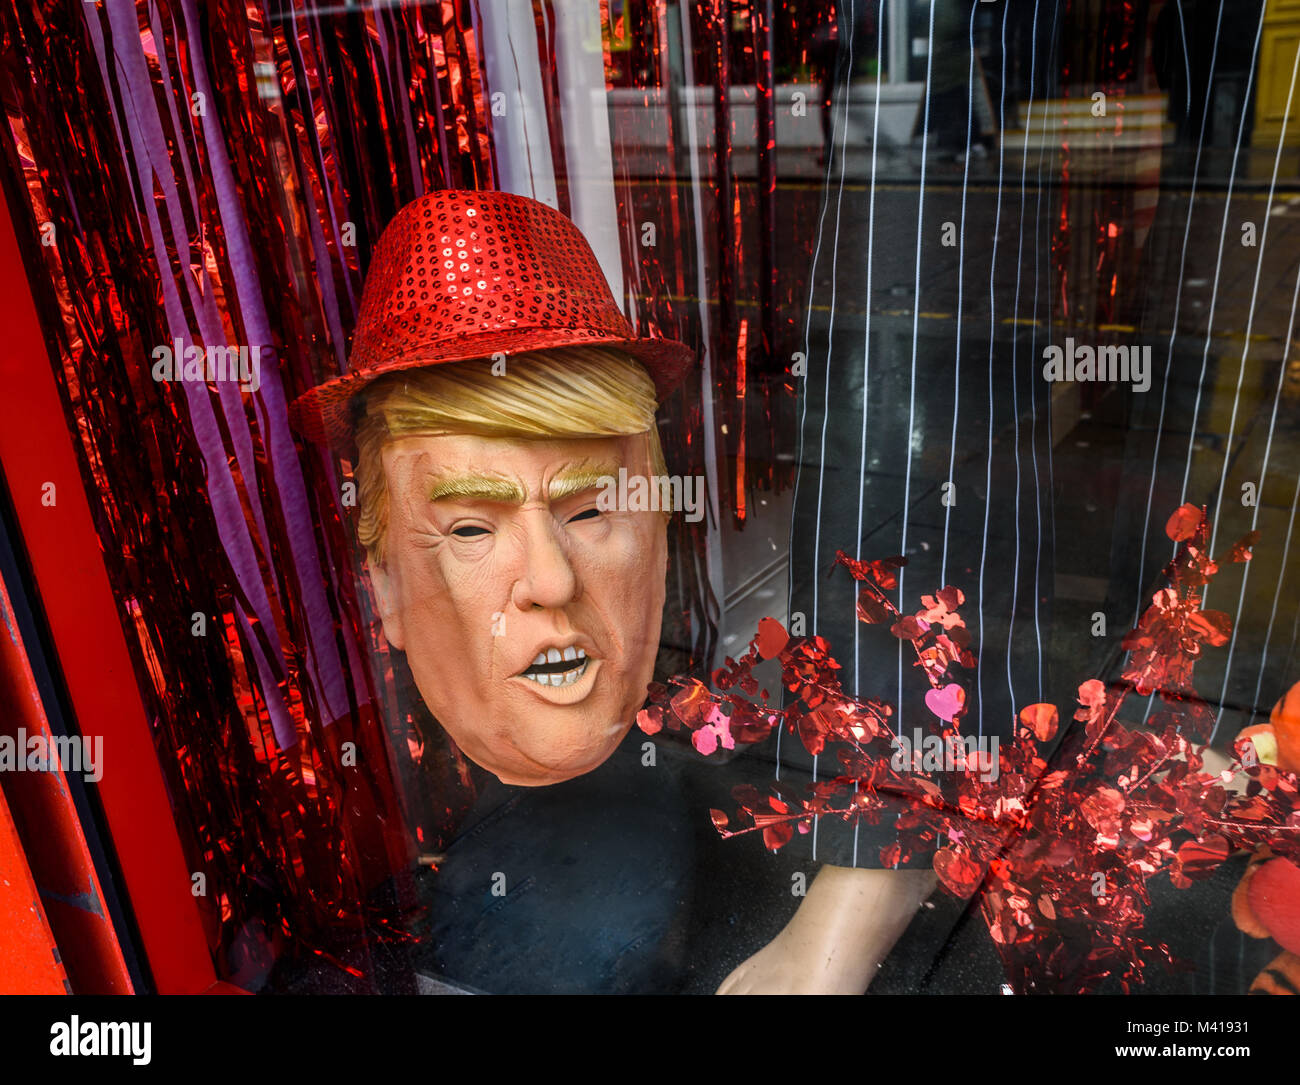 A rubber Donald Trump mask for sale in a novelty gift shop. Stock Photo